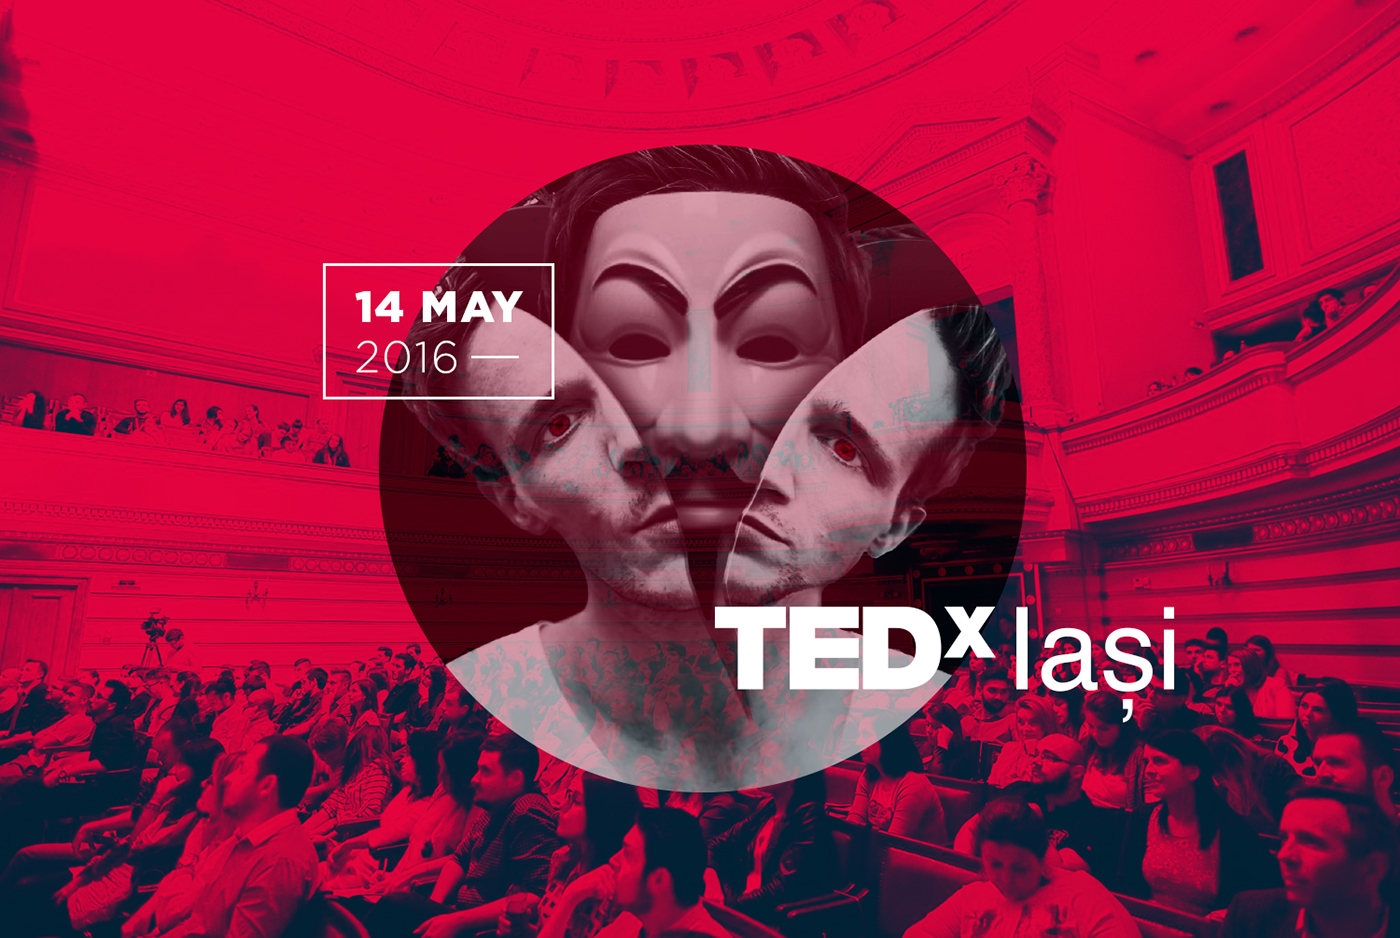 TEDx TED Iasi tedxiasi anonymous tickets Event speech